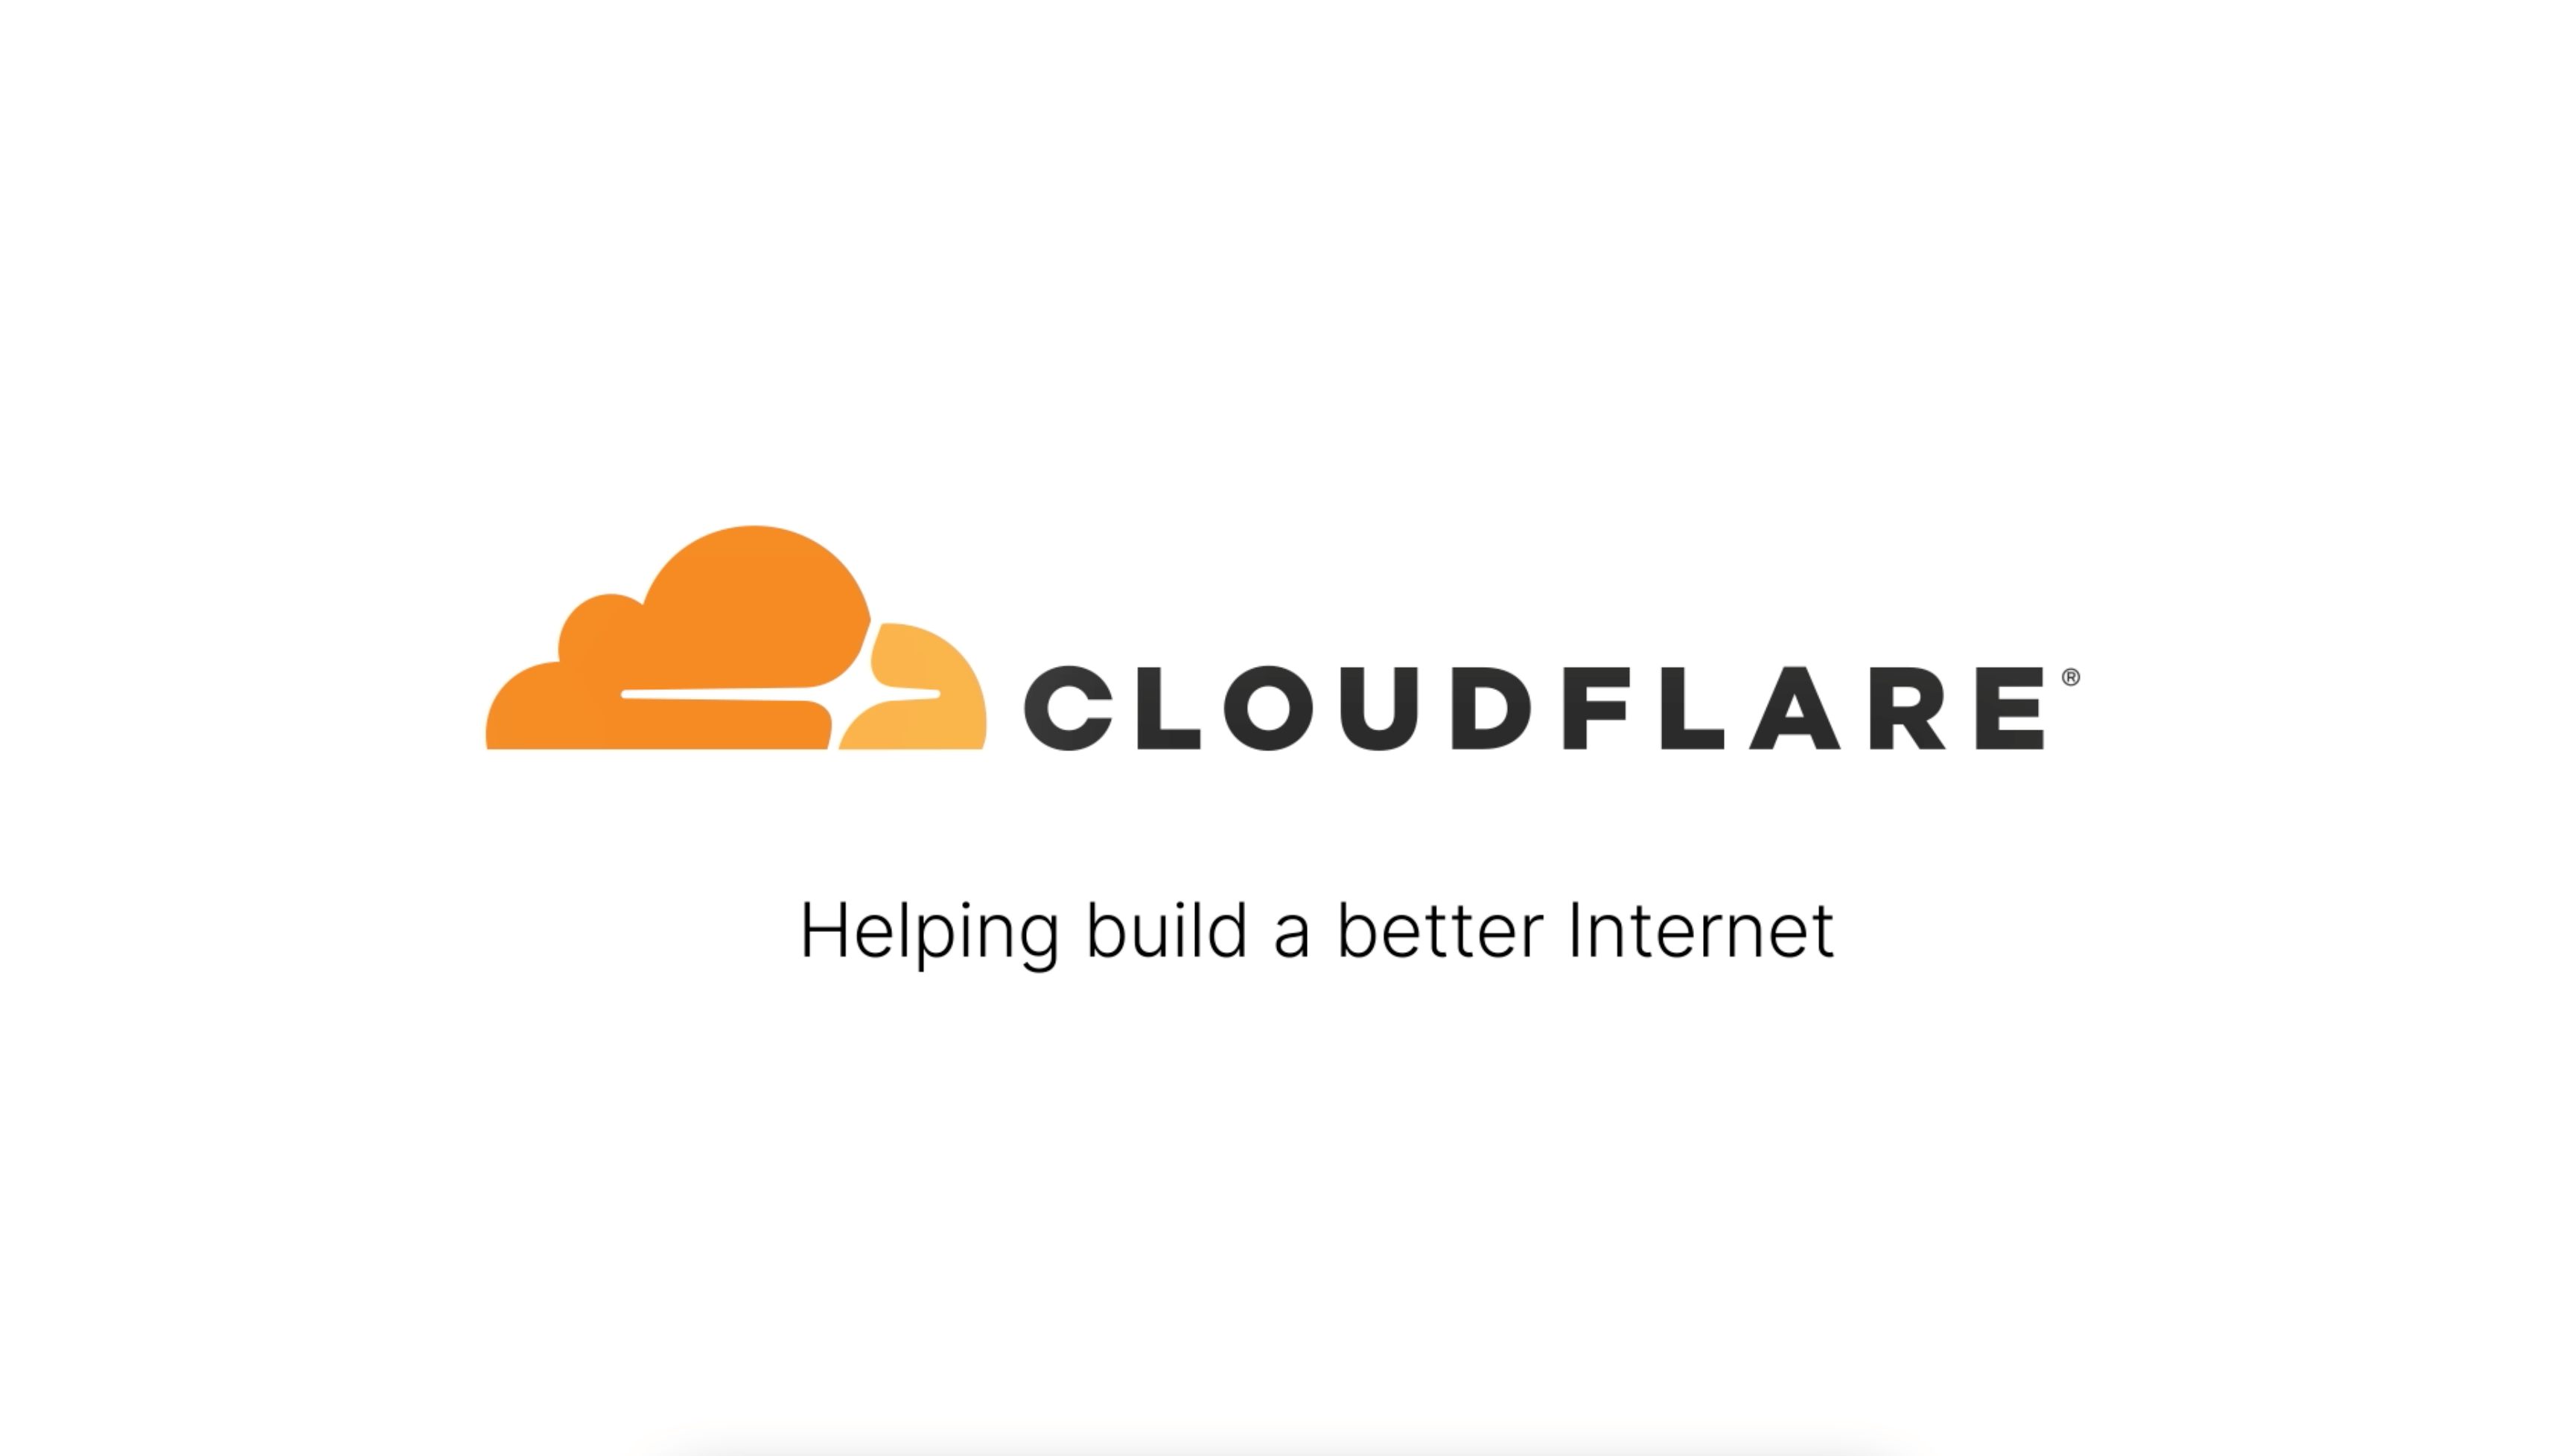 Moviendo mis side projects a Cloudflare